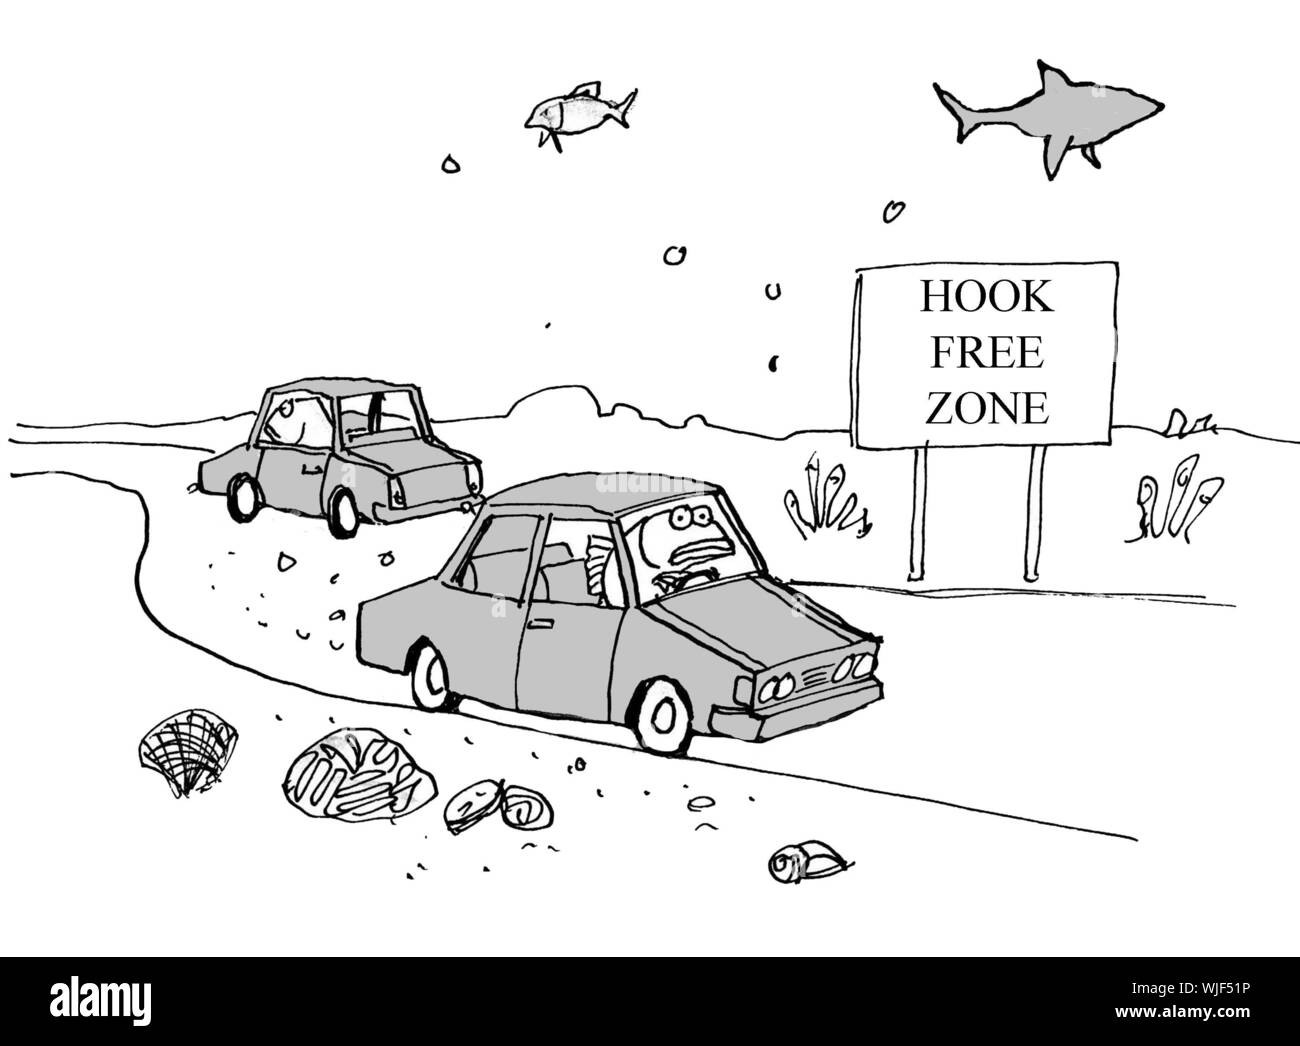 Hook Free Zone. Banque D'Images